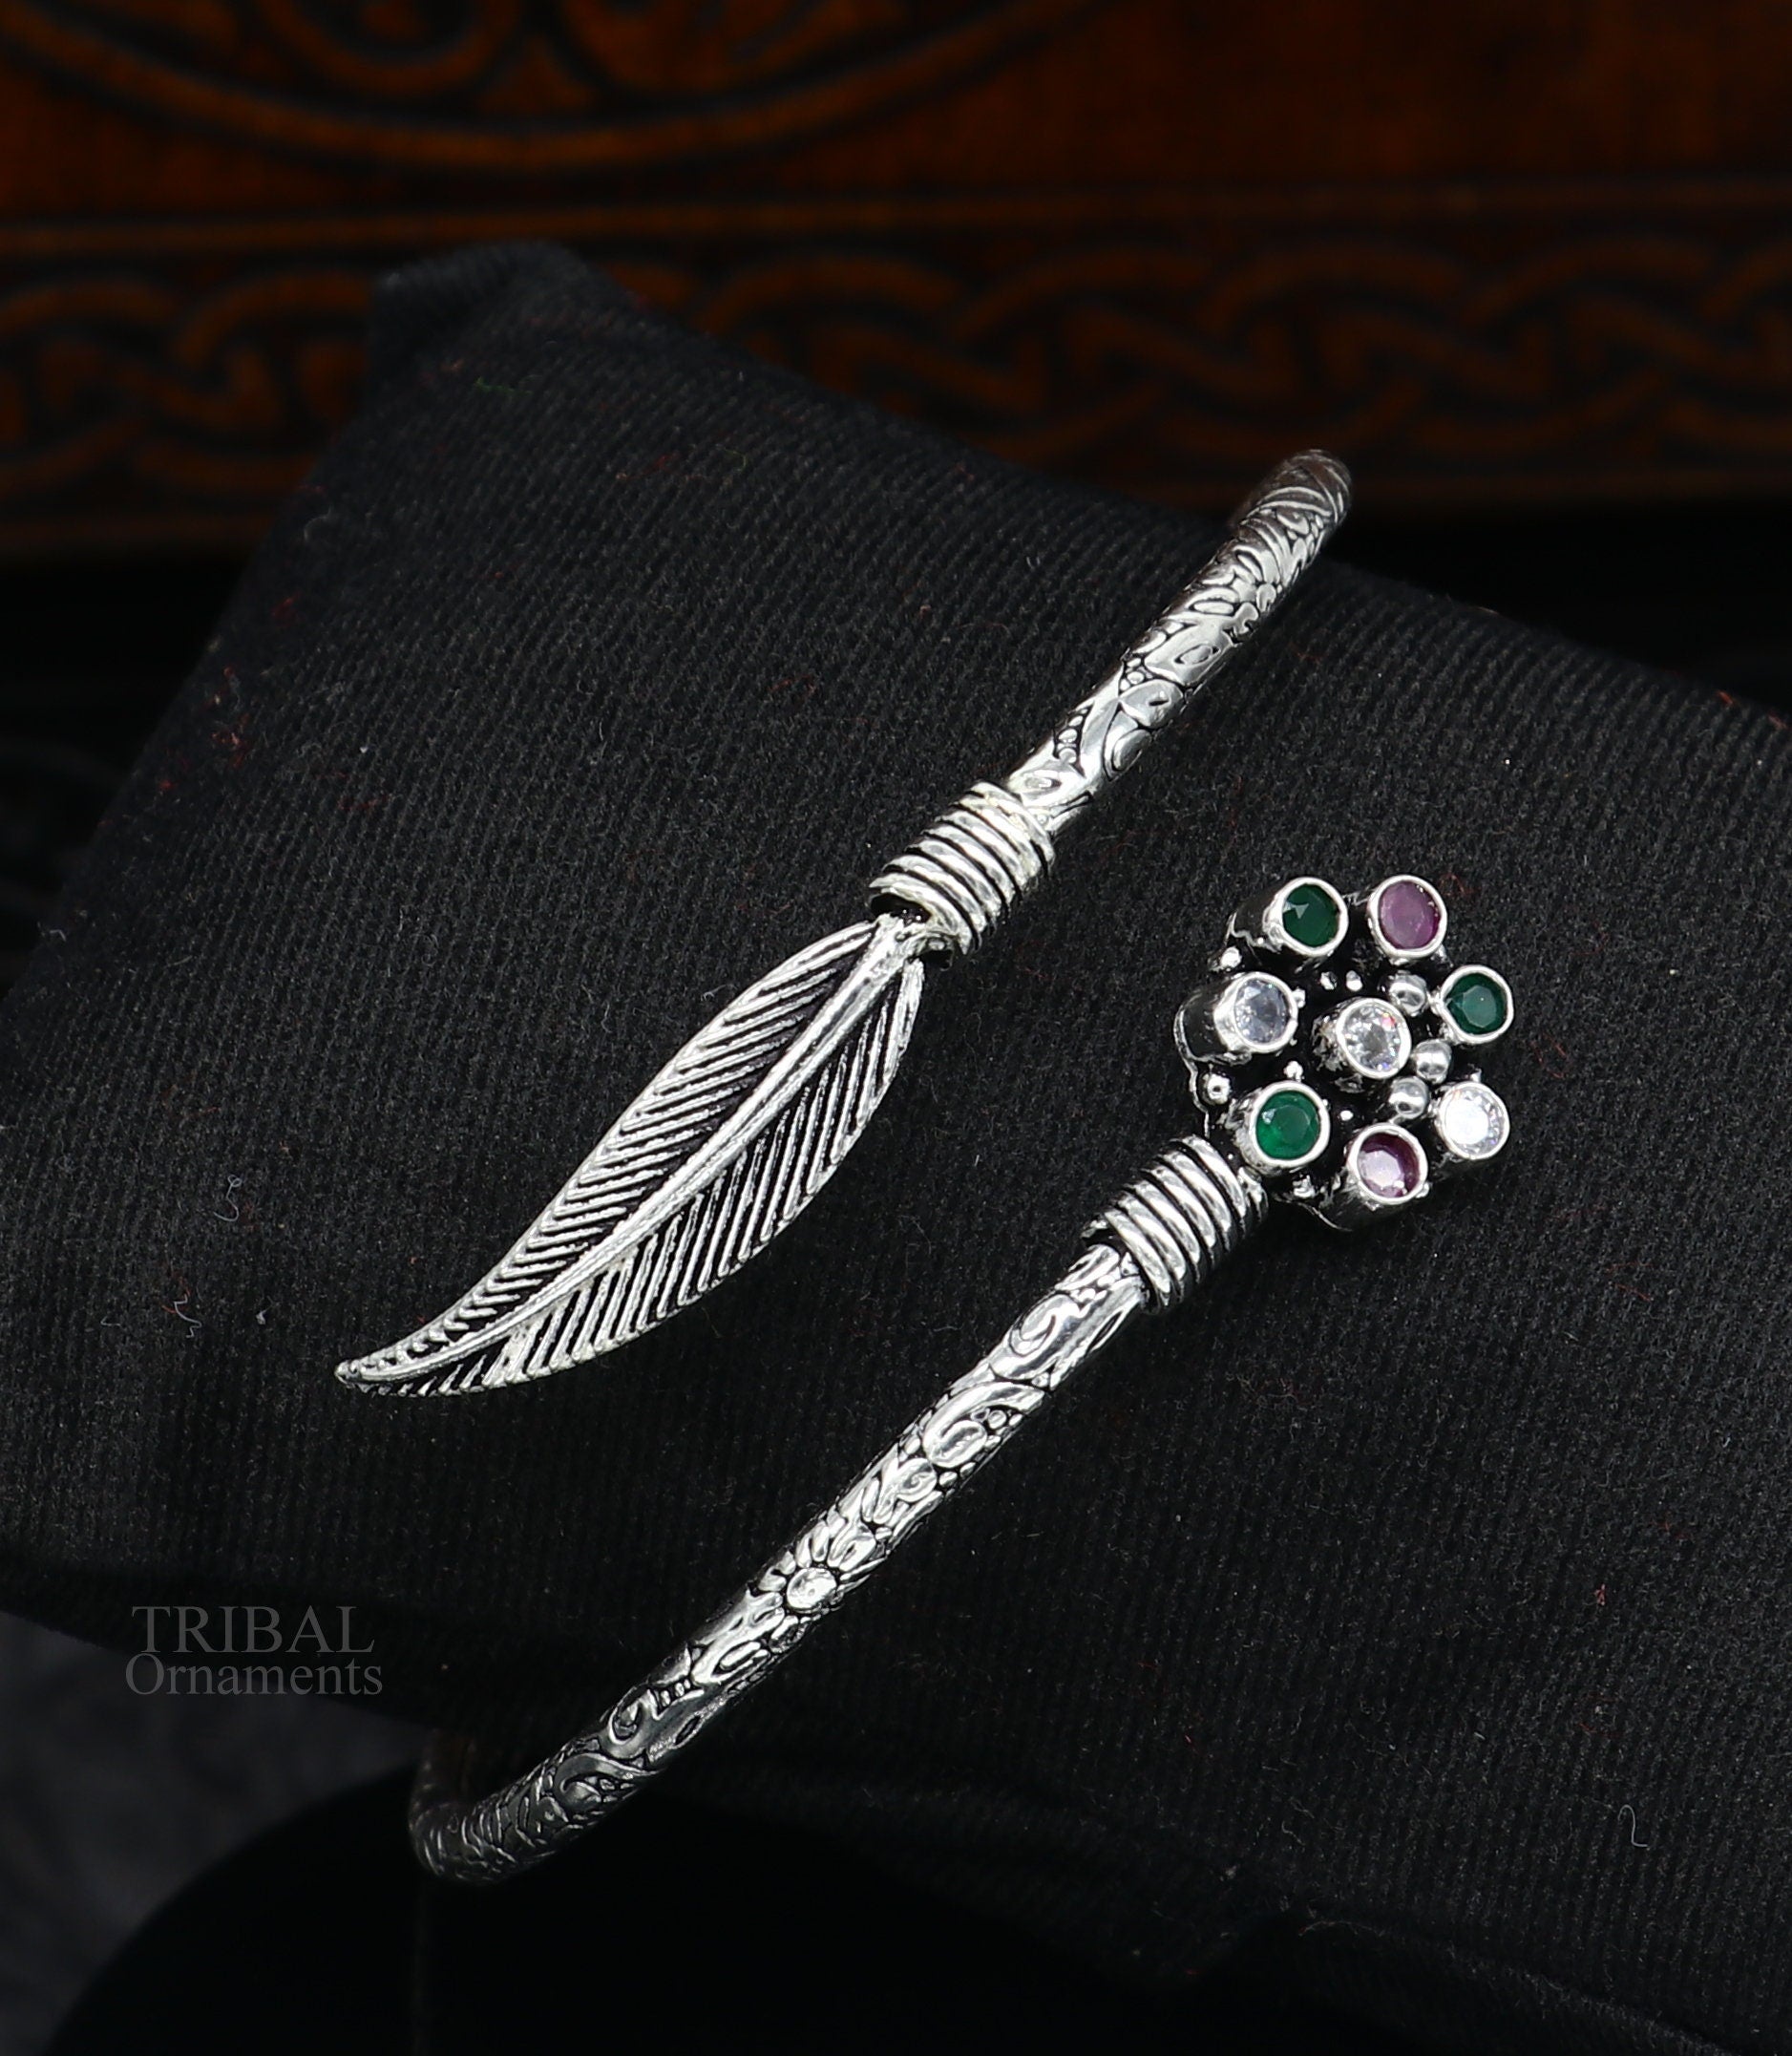 Feather style 925 sterling silver exclusive design handmade bangle bracelet, easy to plug with your wrist, pure silver kada jewelry nssk670 - TRIBAL ORNAMENTS